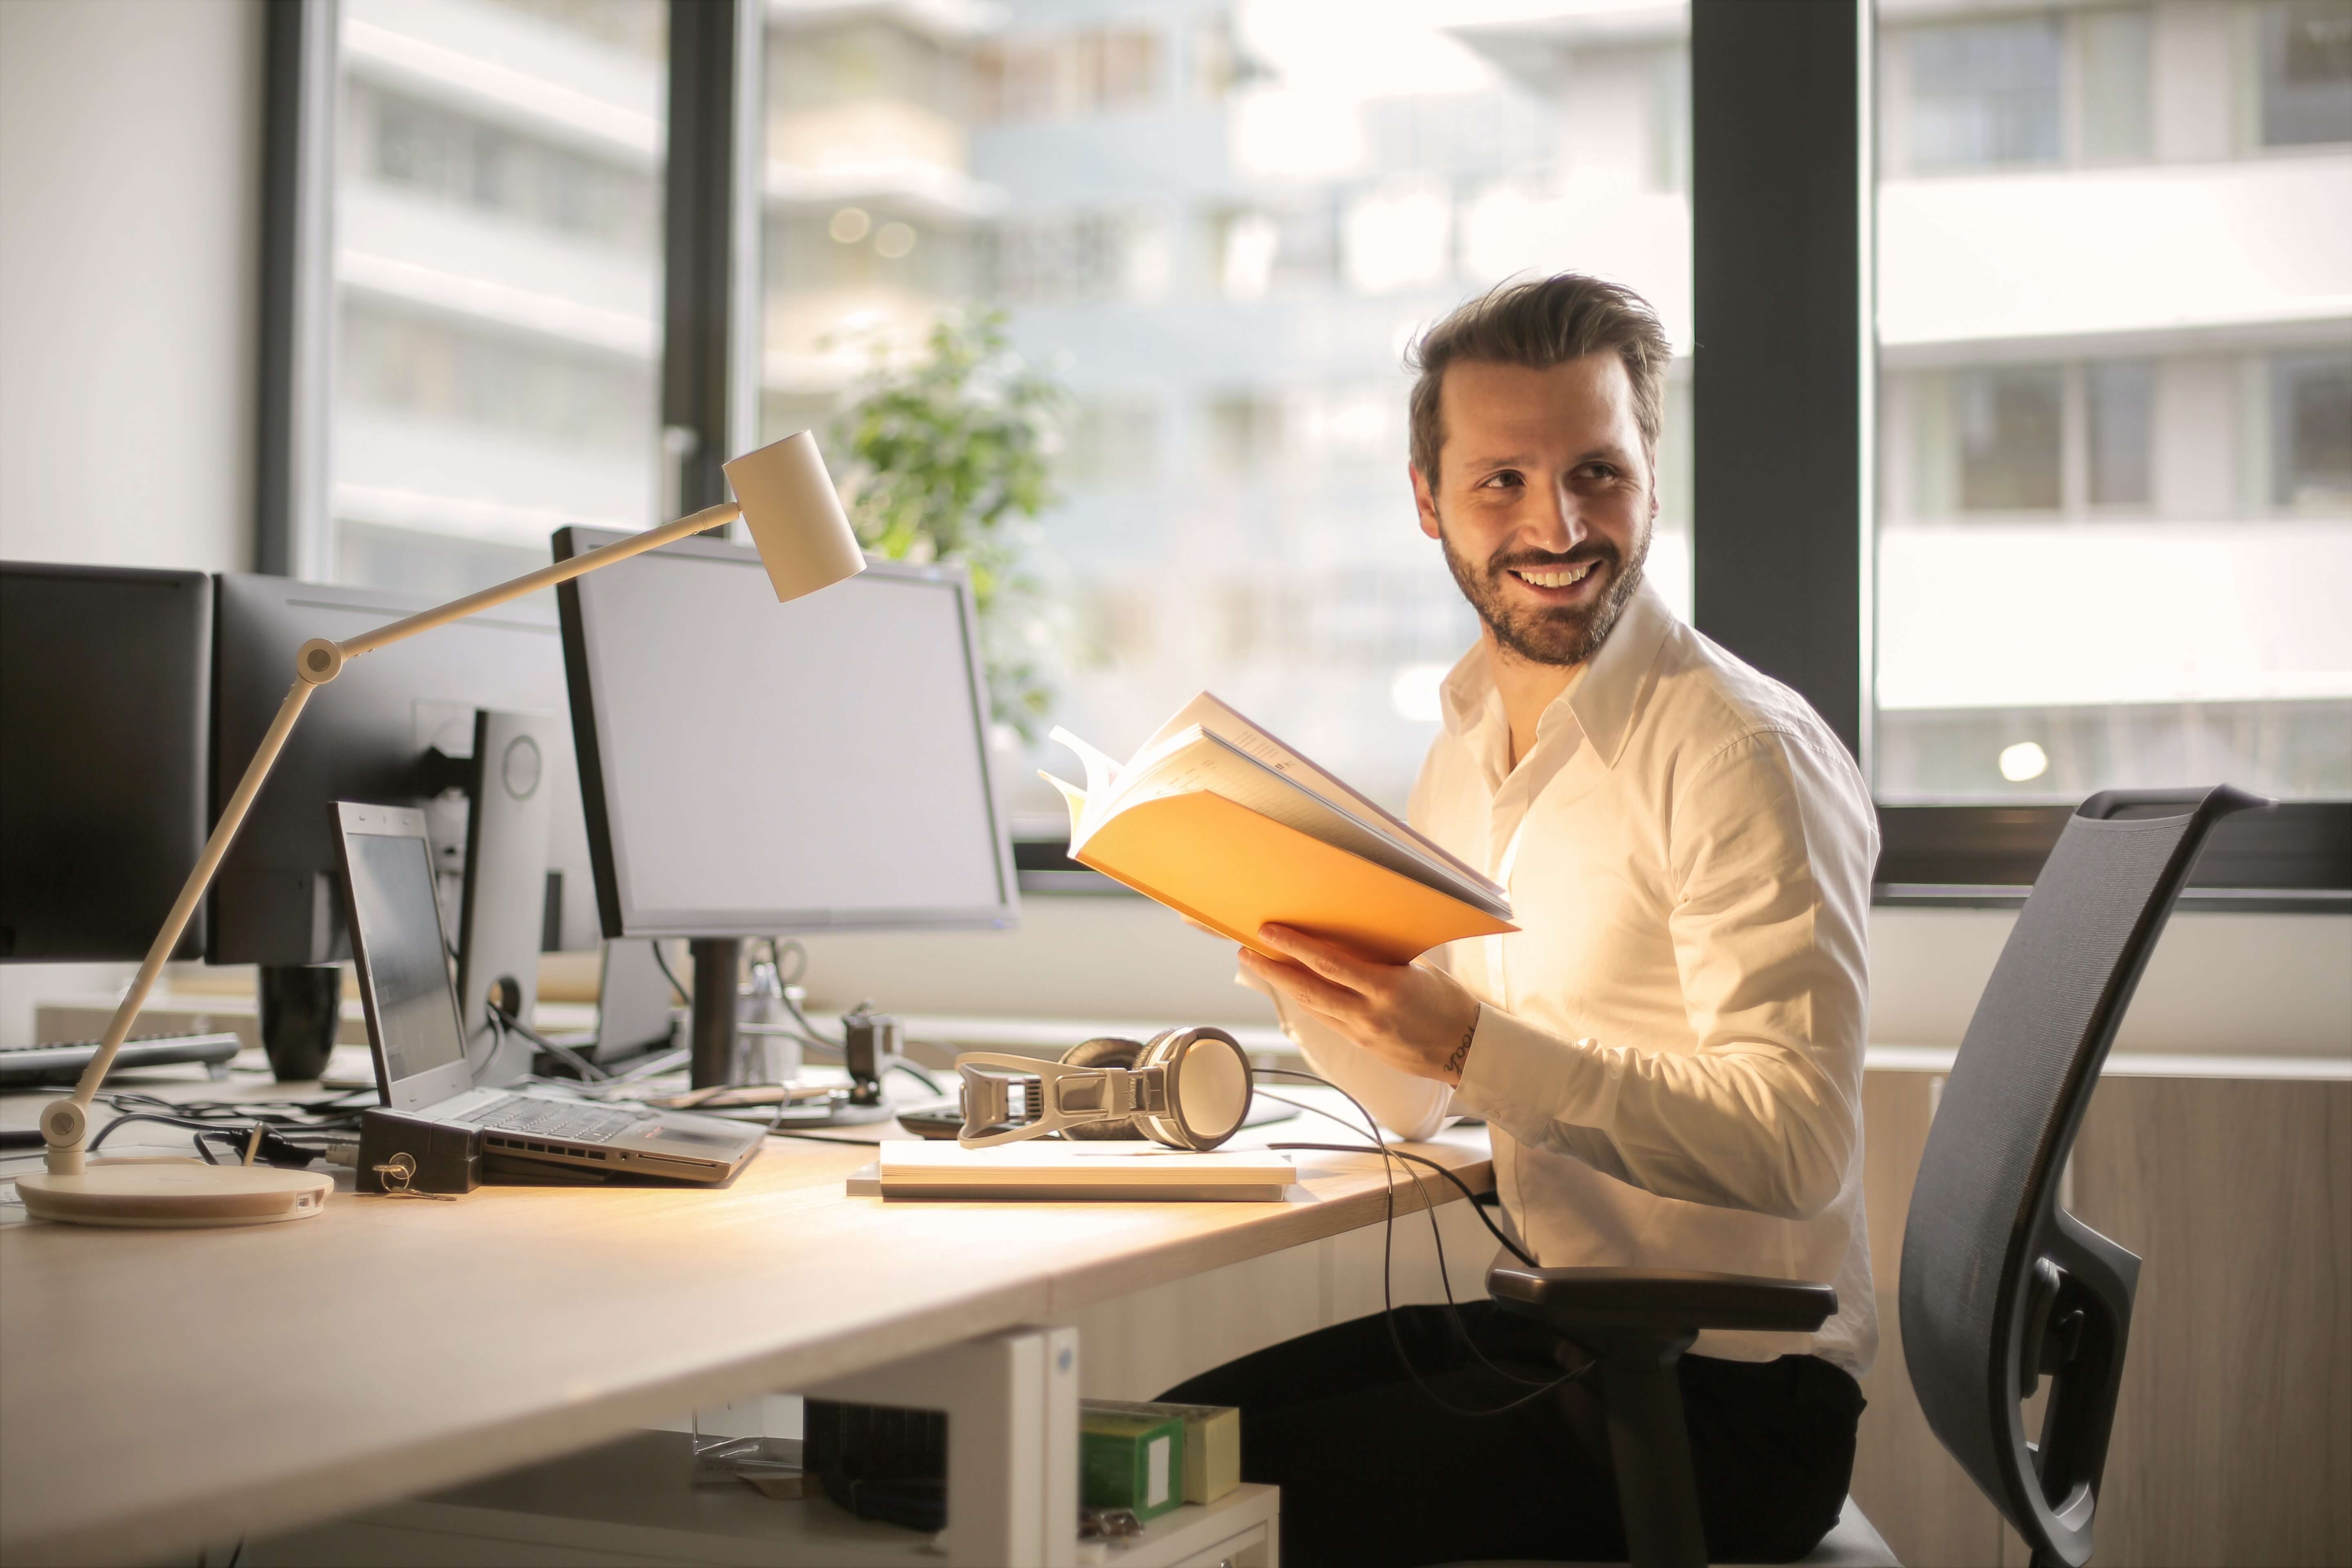 Smiling man holding yellow book, turns around in desk seat and looks back